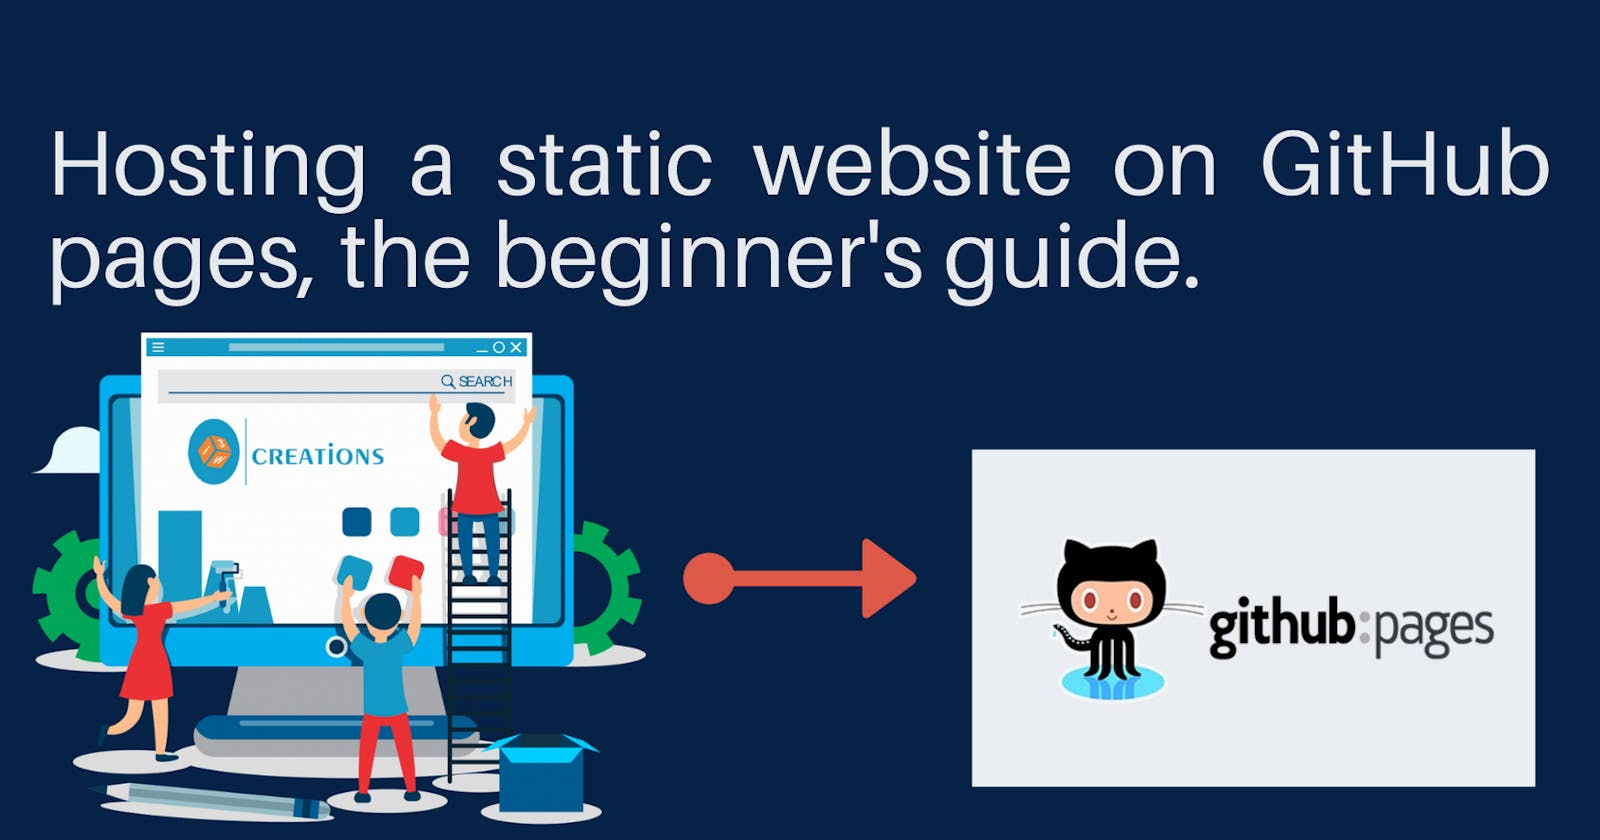 Hosting a static website on GitHub pages, the beginner's guide.